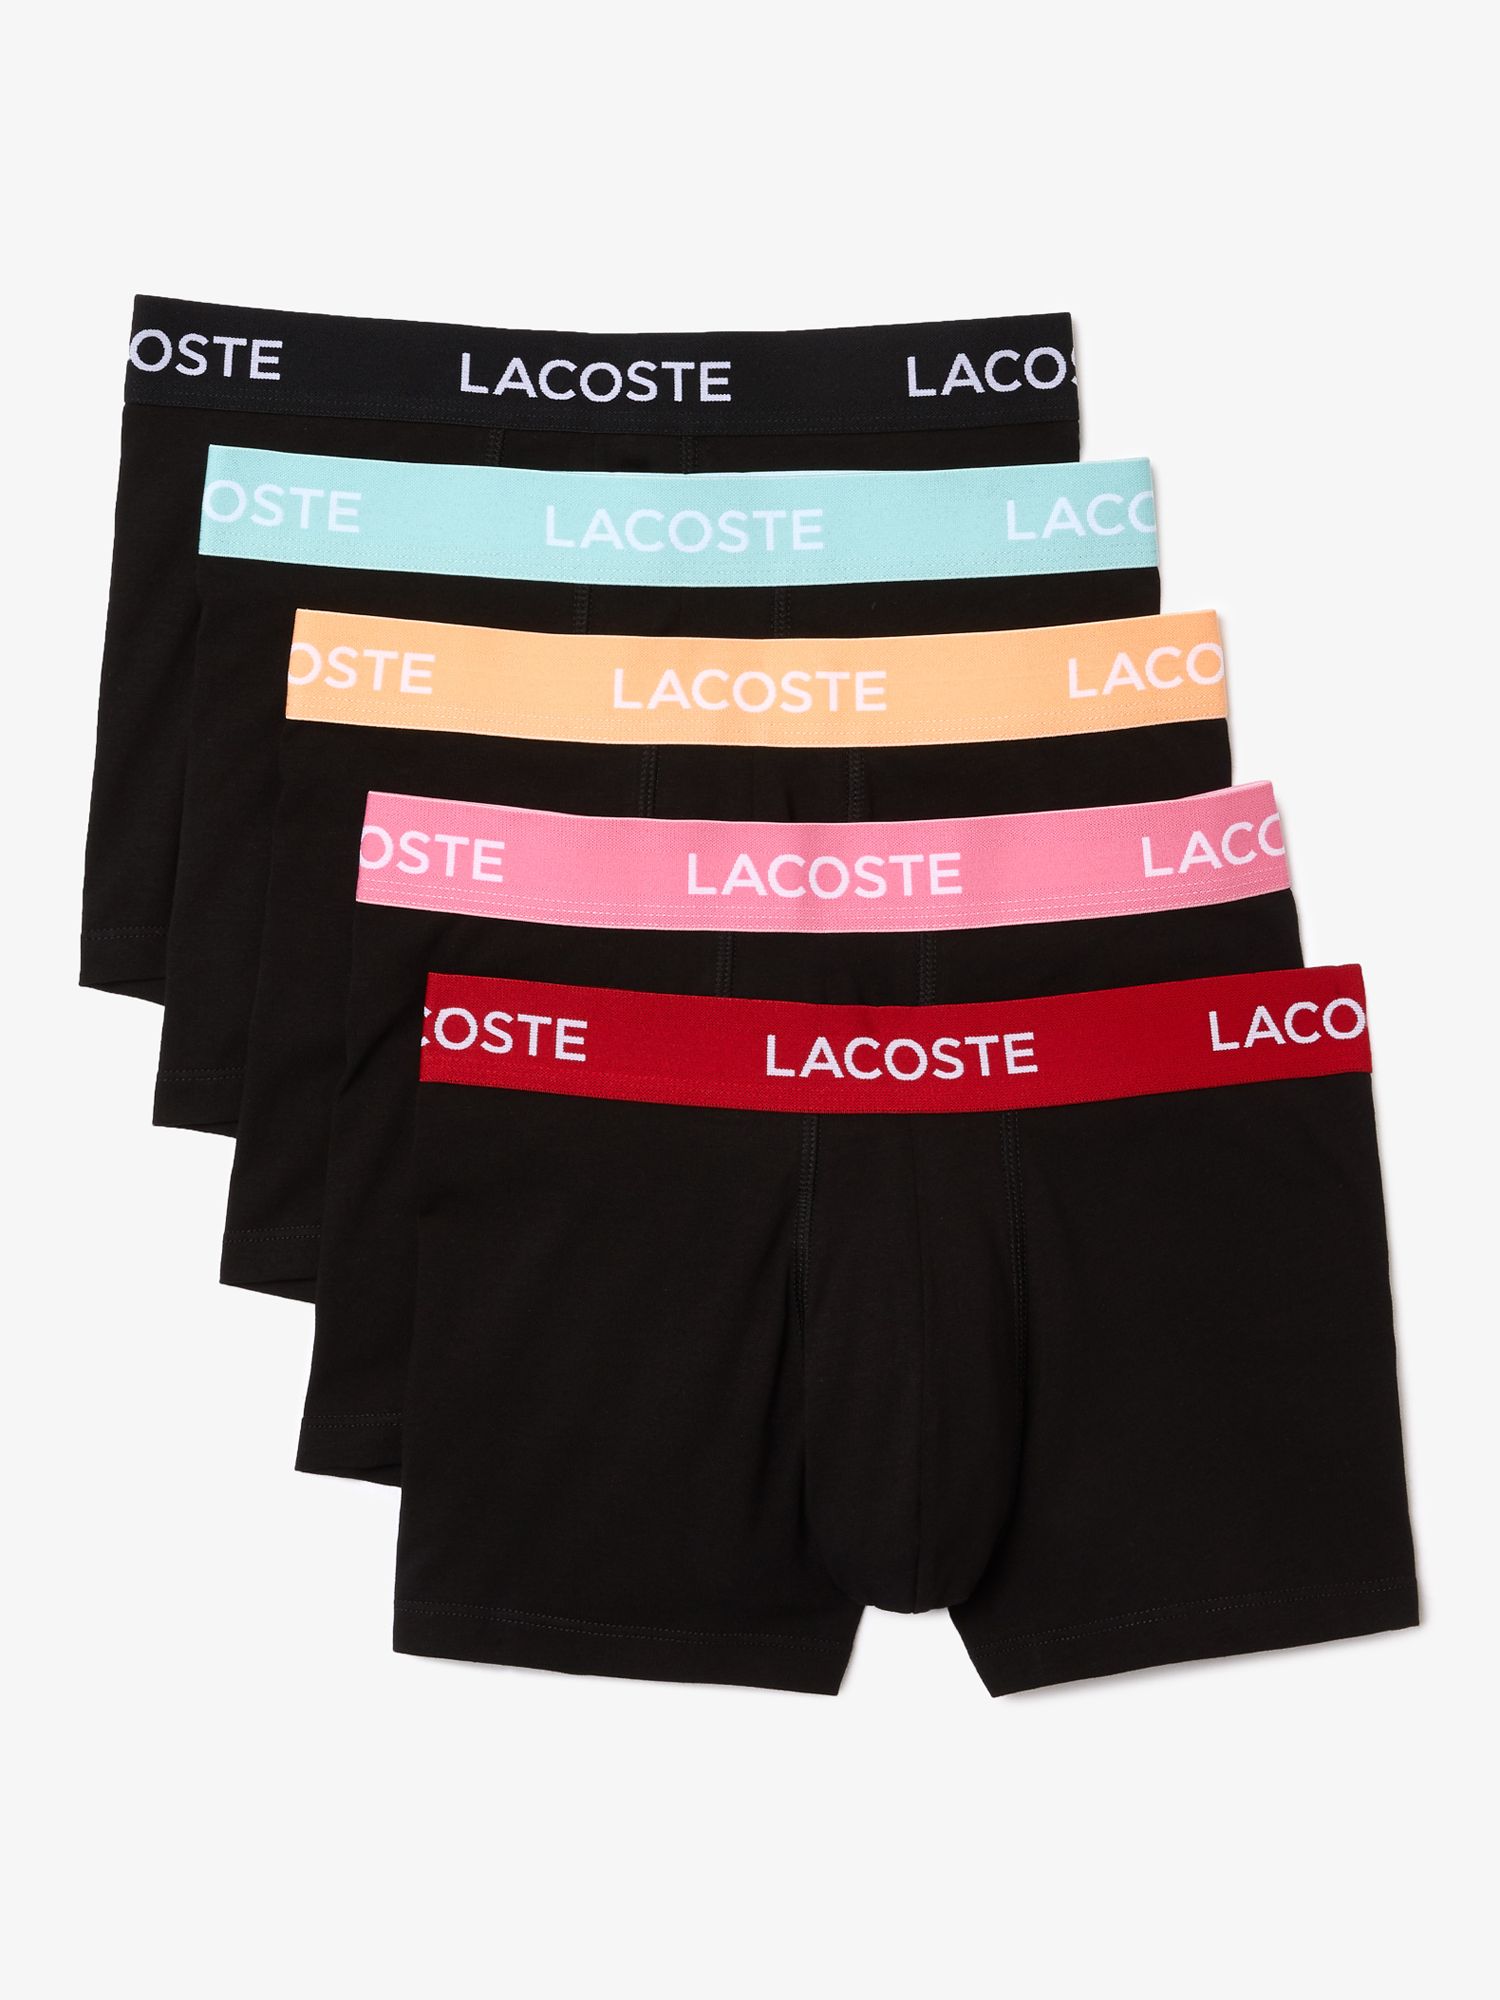 Mens Lacoste multi Casual Boxer Briefs (Pack of 3)